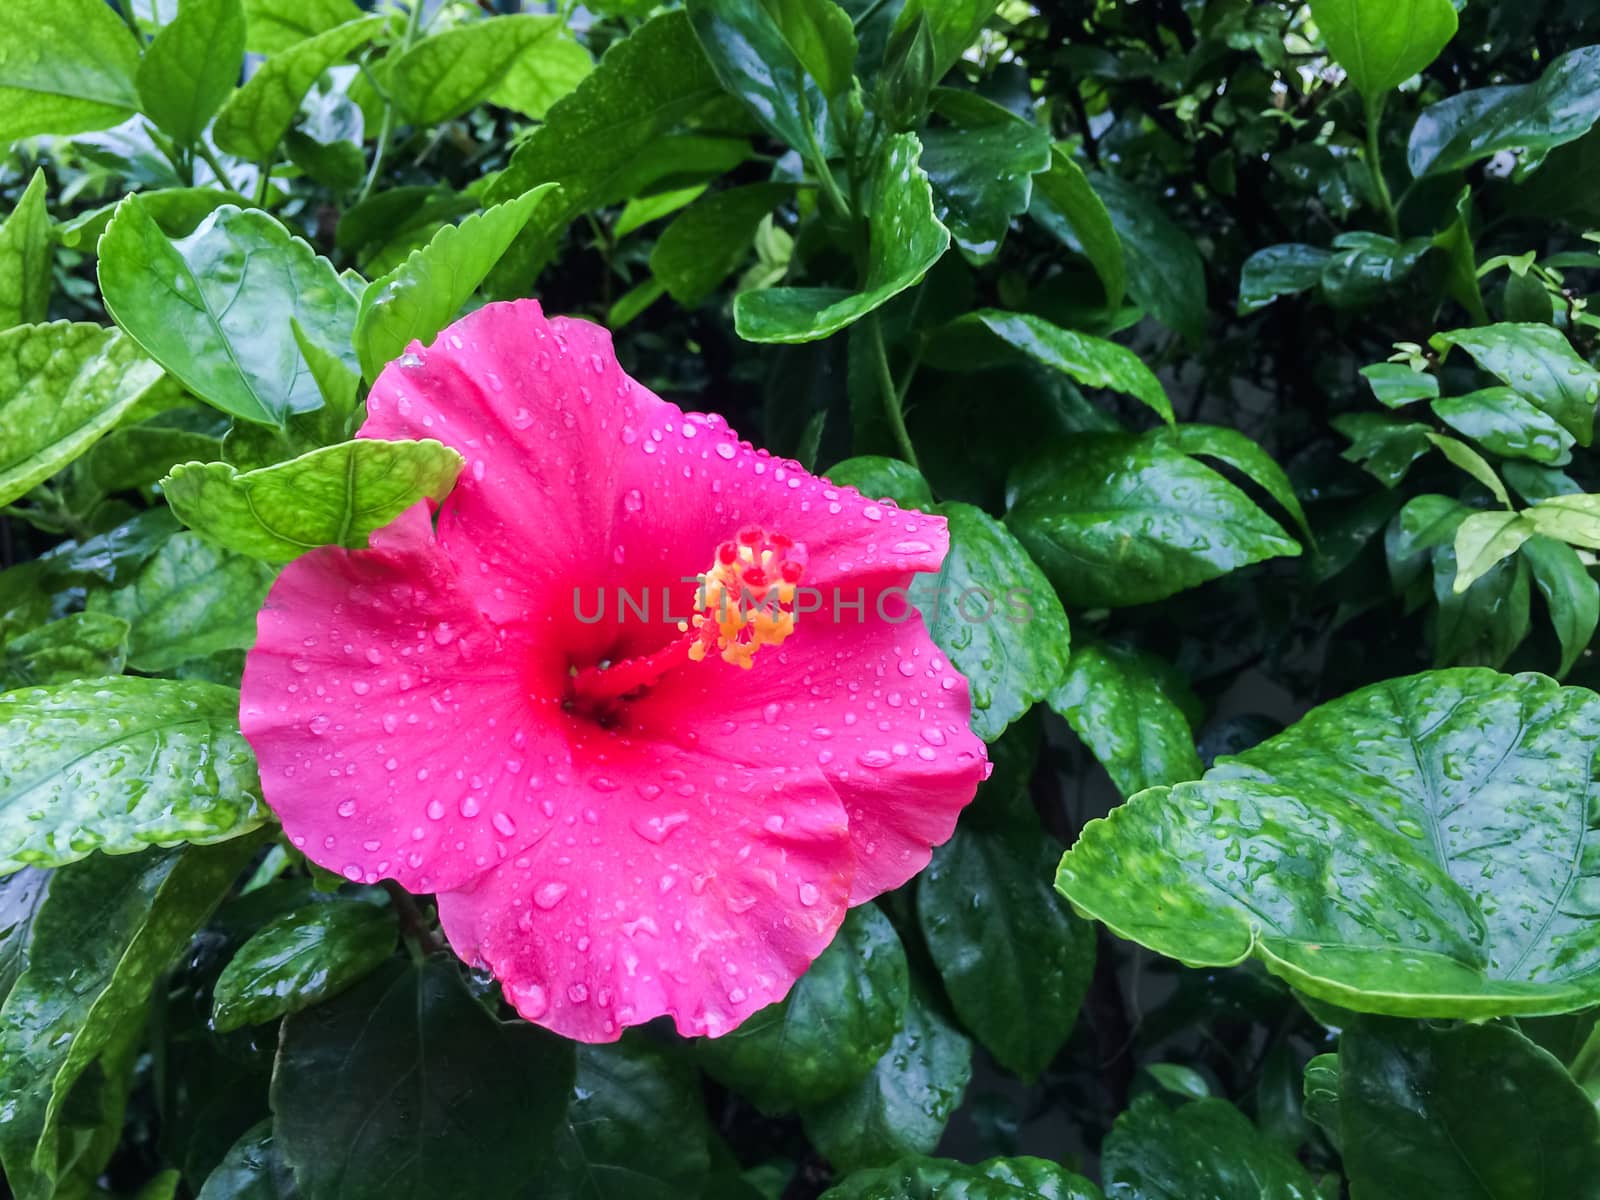 Pink Hibiscus flower is blossom on green leaf color background which has a drop of water on the petals. by prapstock